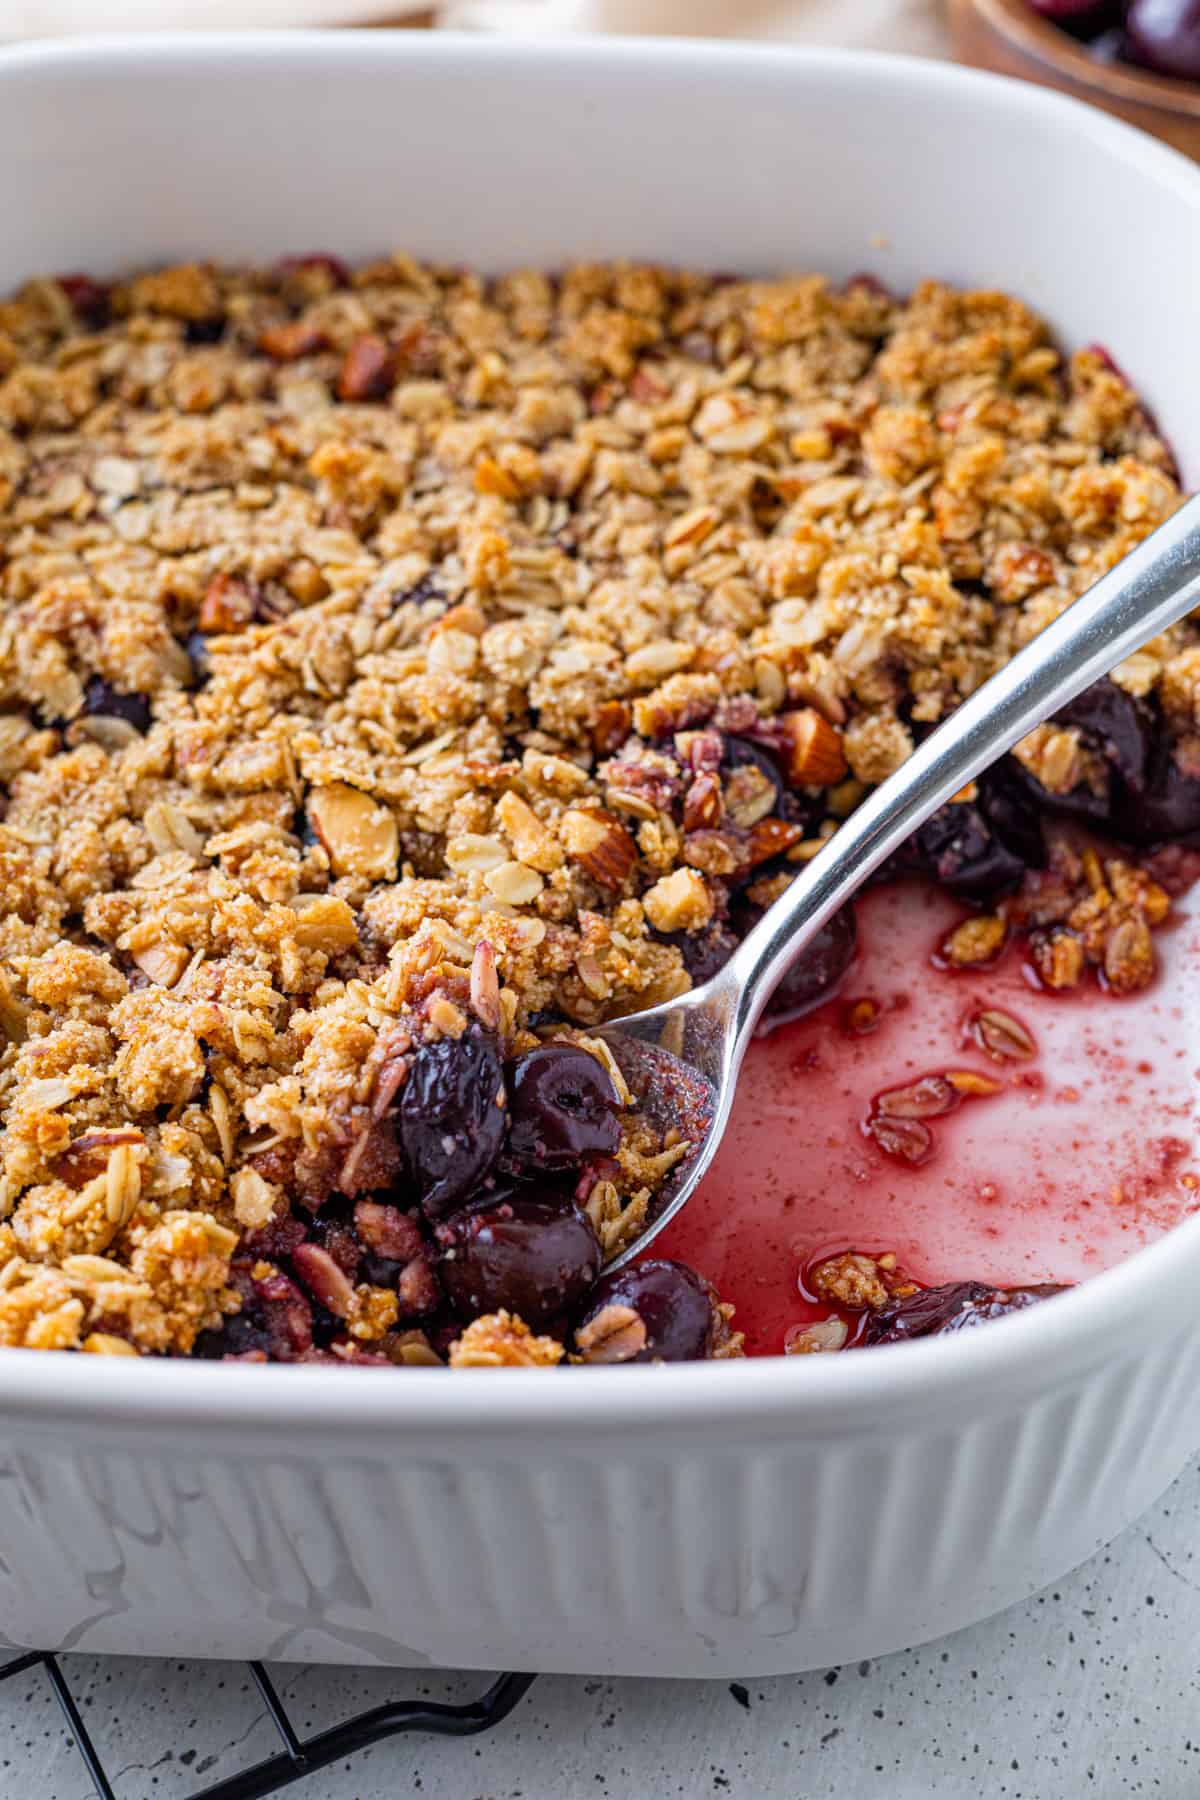 A pan of cherry crumble with a spoon.